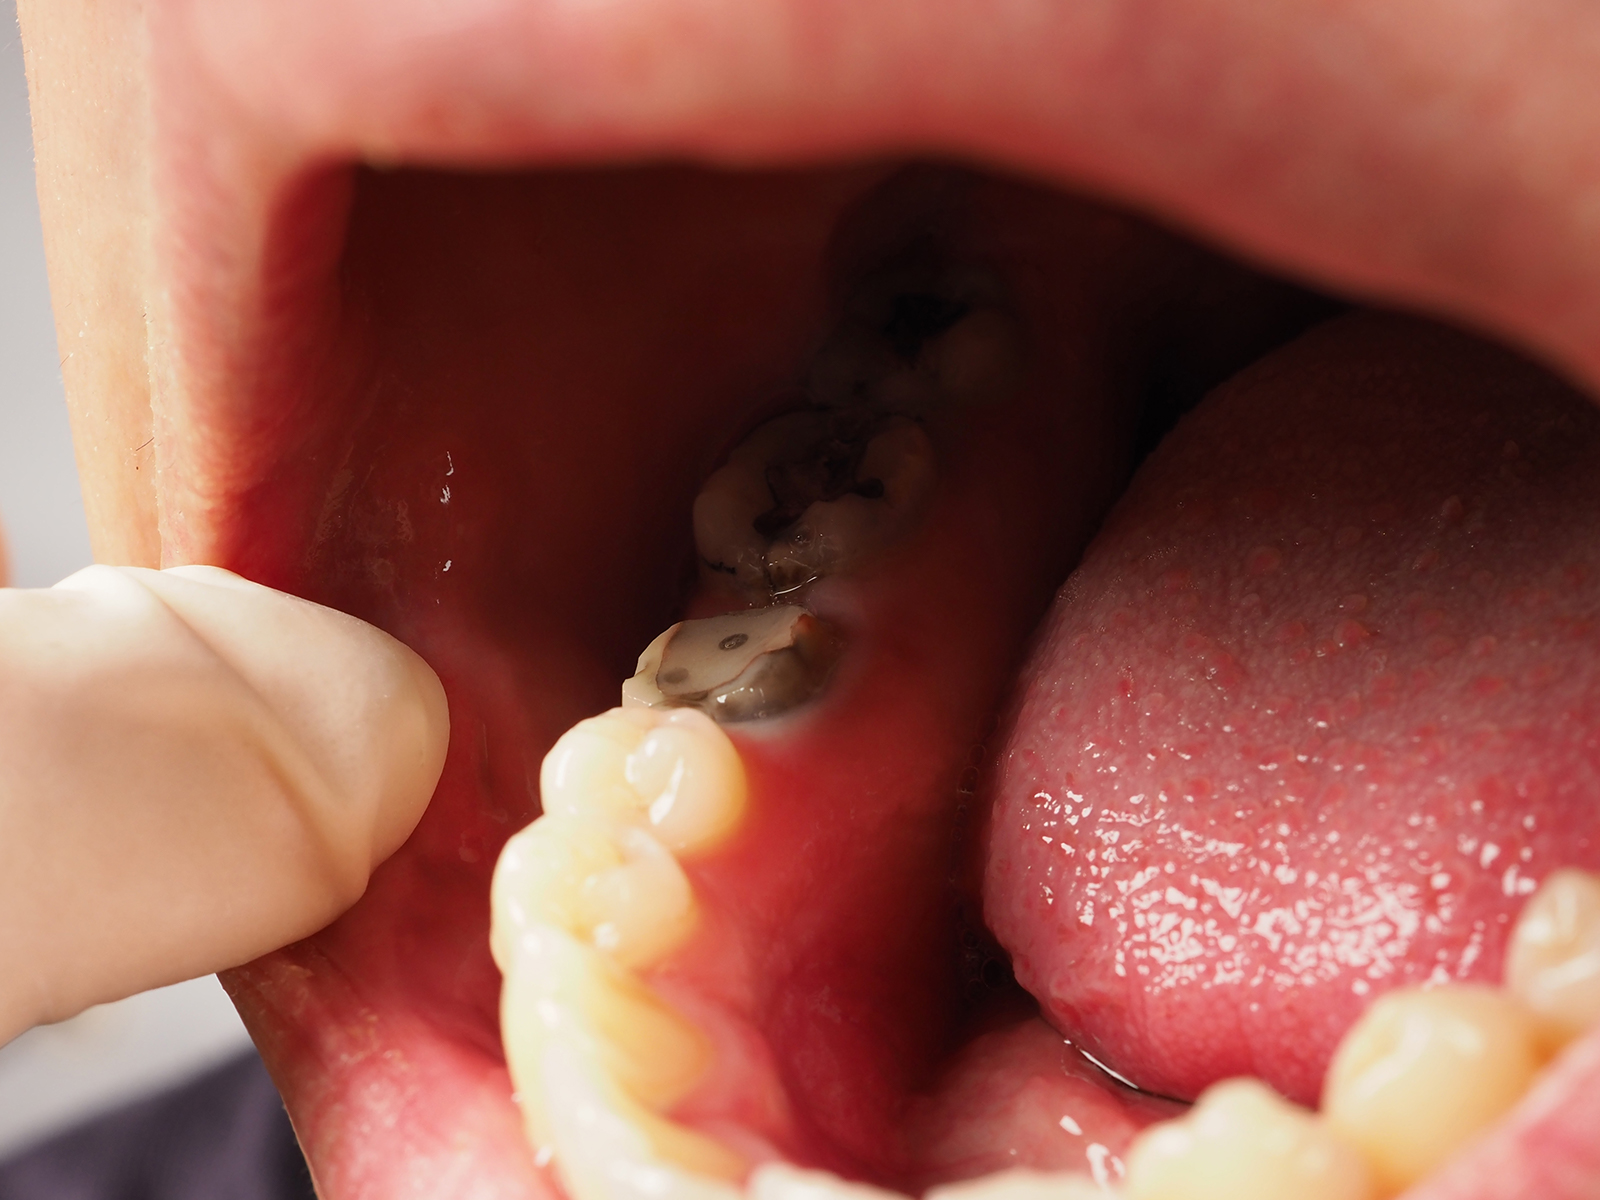 Will A Tooth Continue To Decay After A Root Canal?